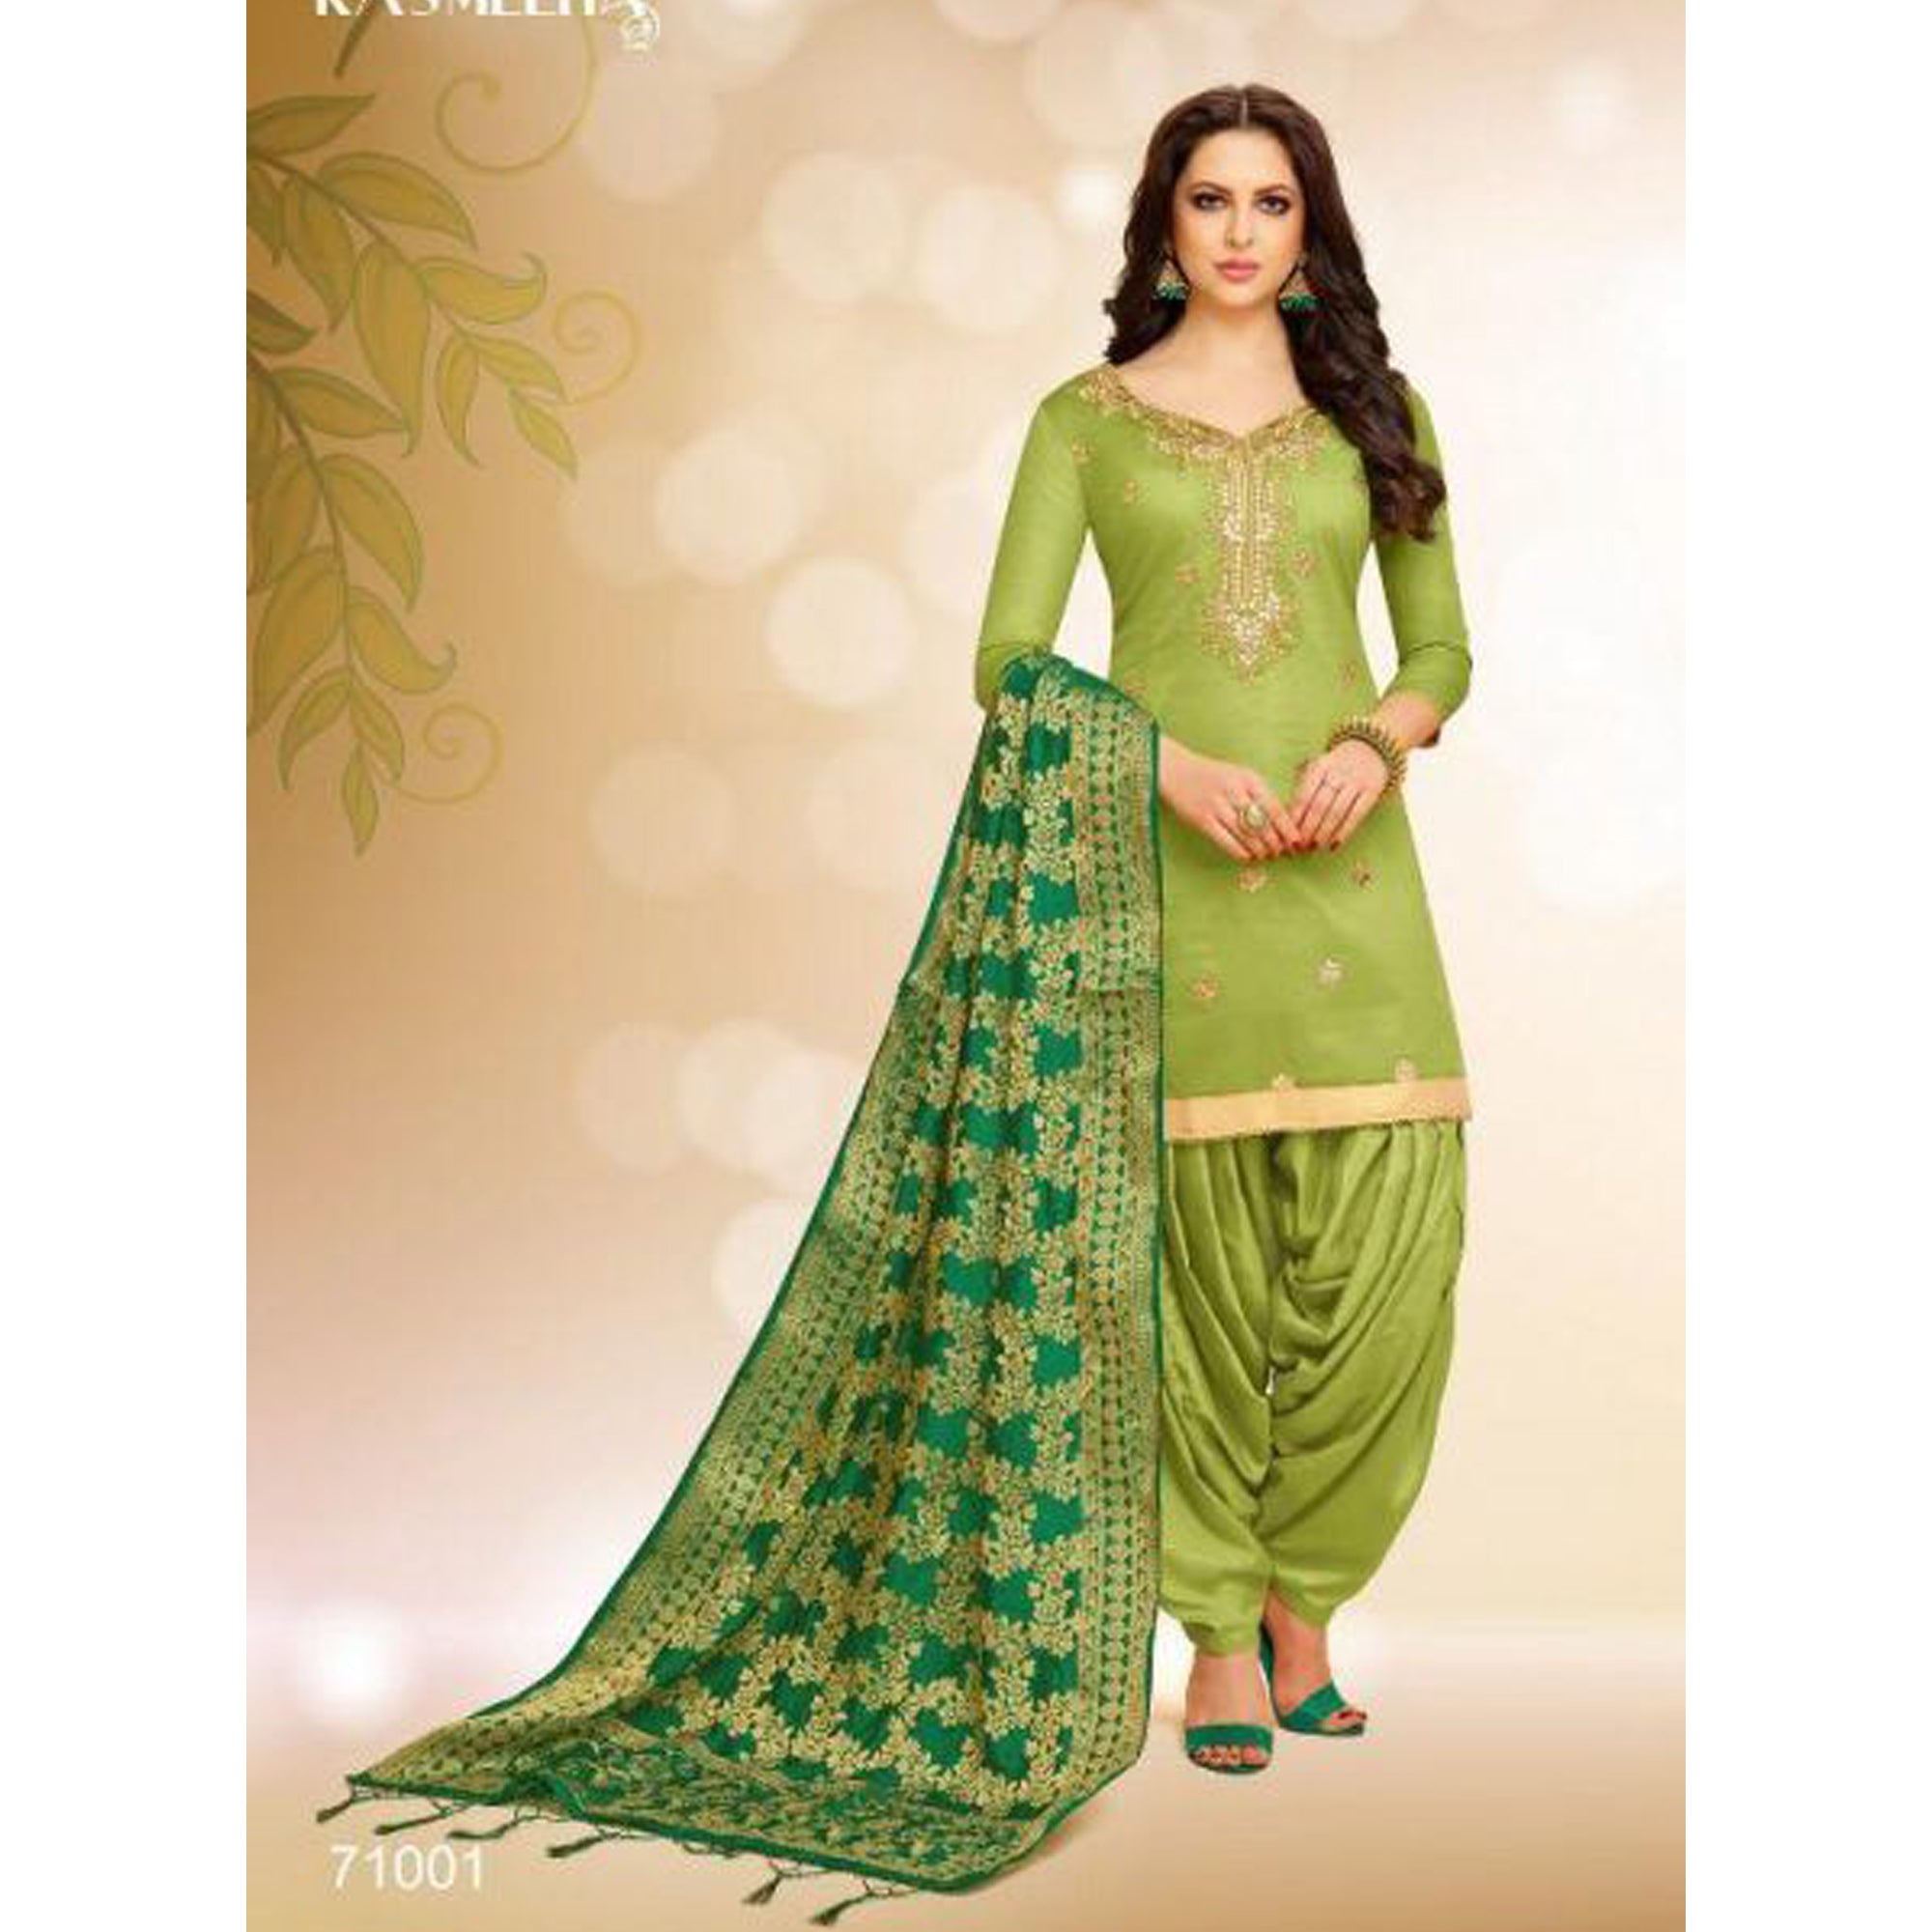 10 Stylish Patiala Salwar Suit To Up The Glam Quotient